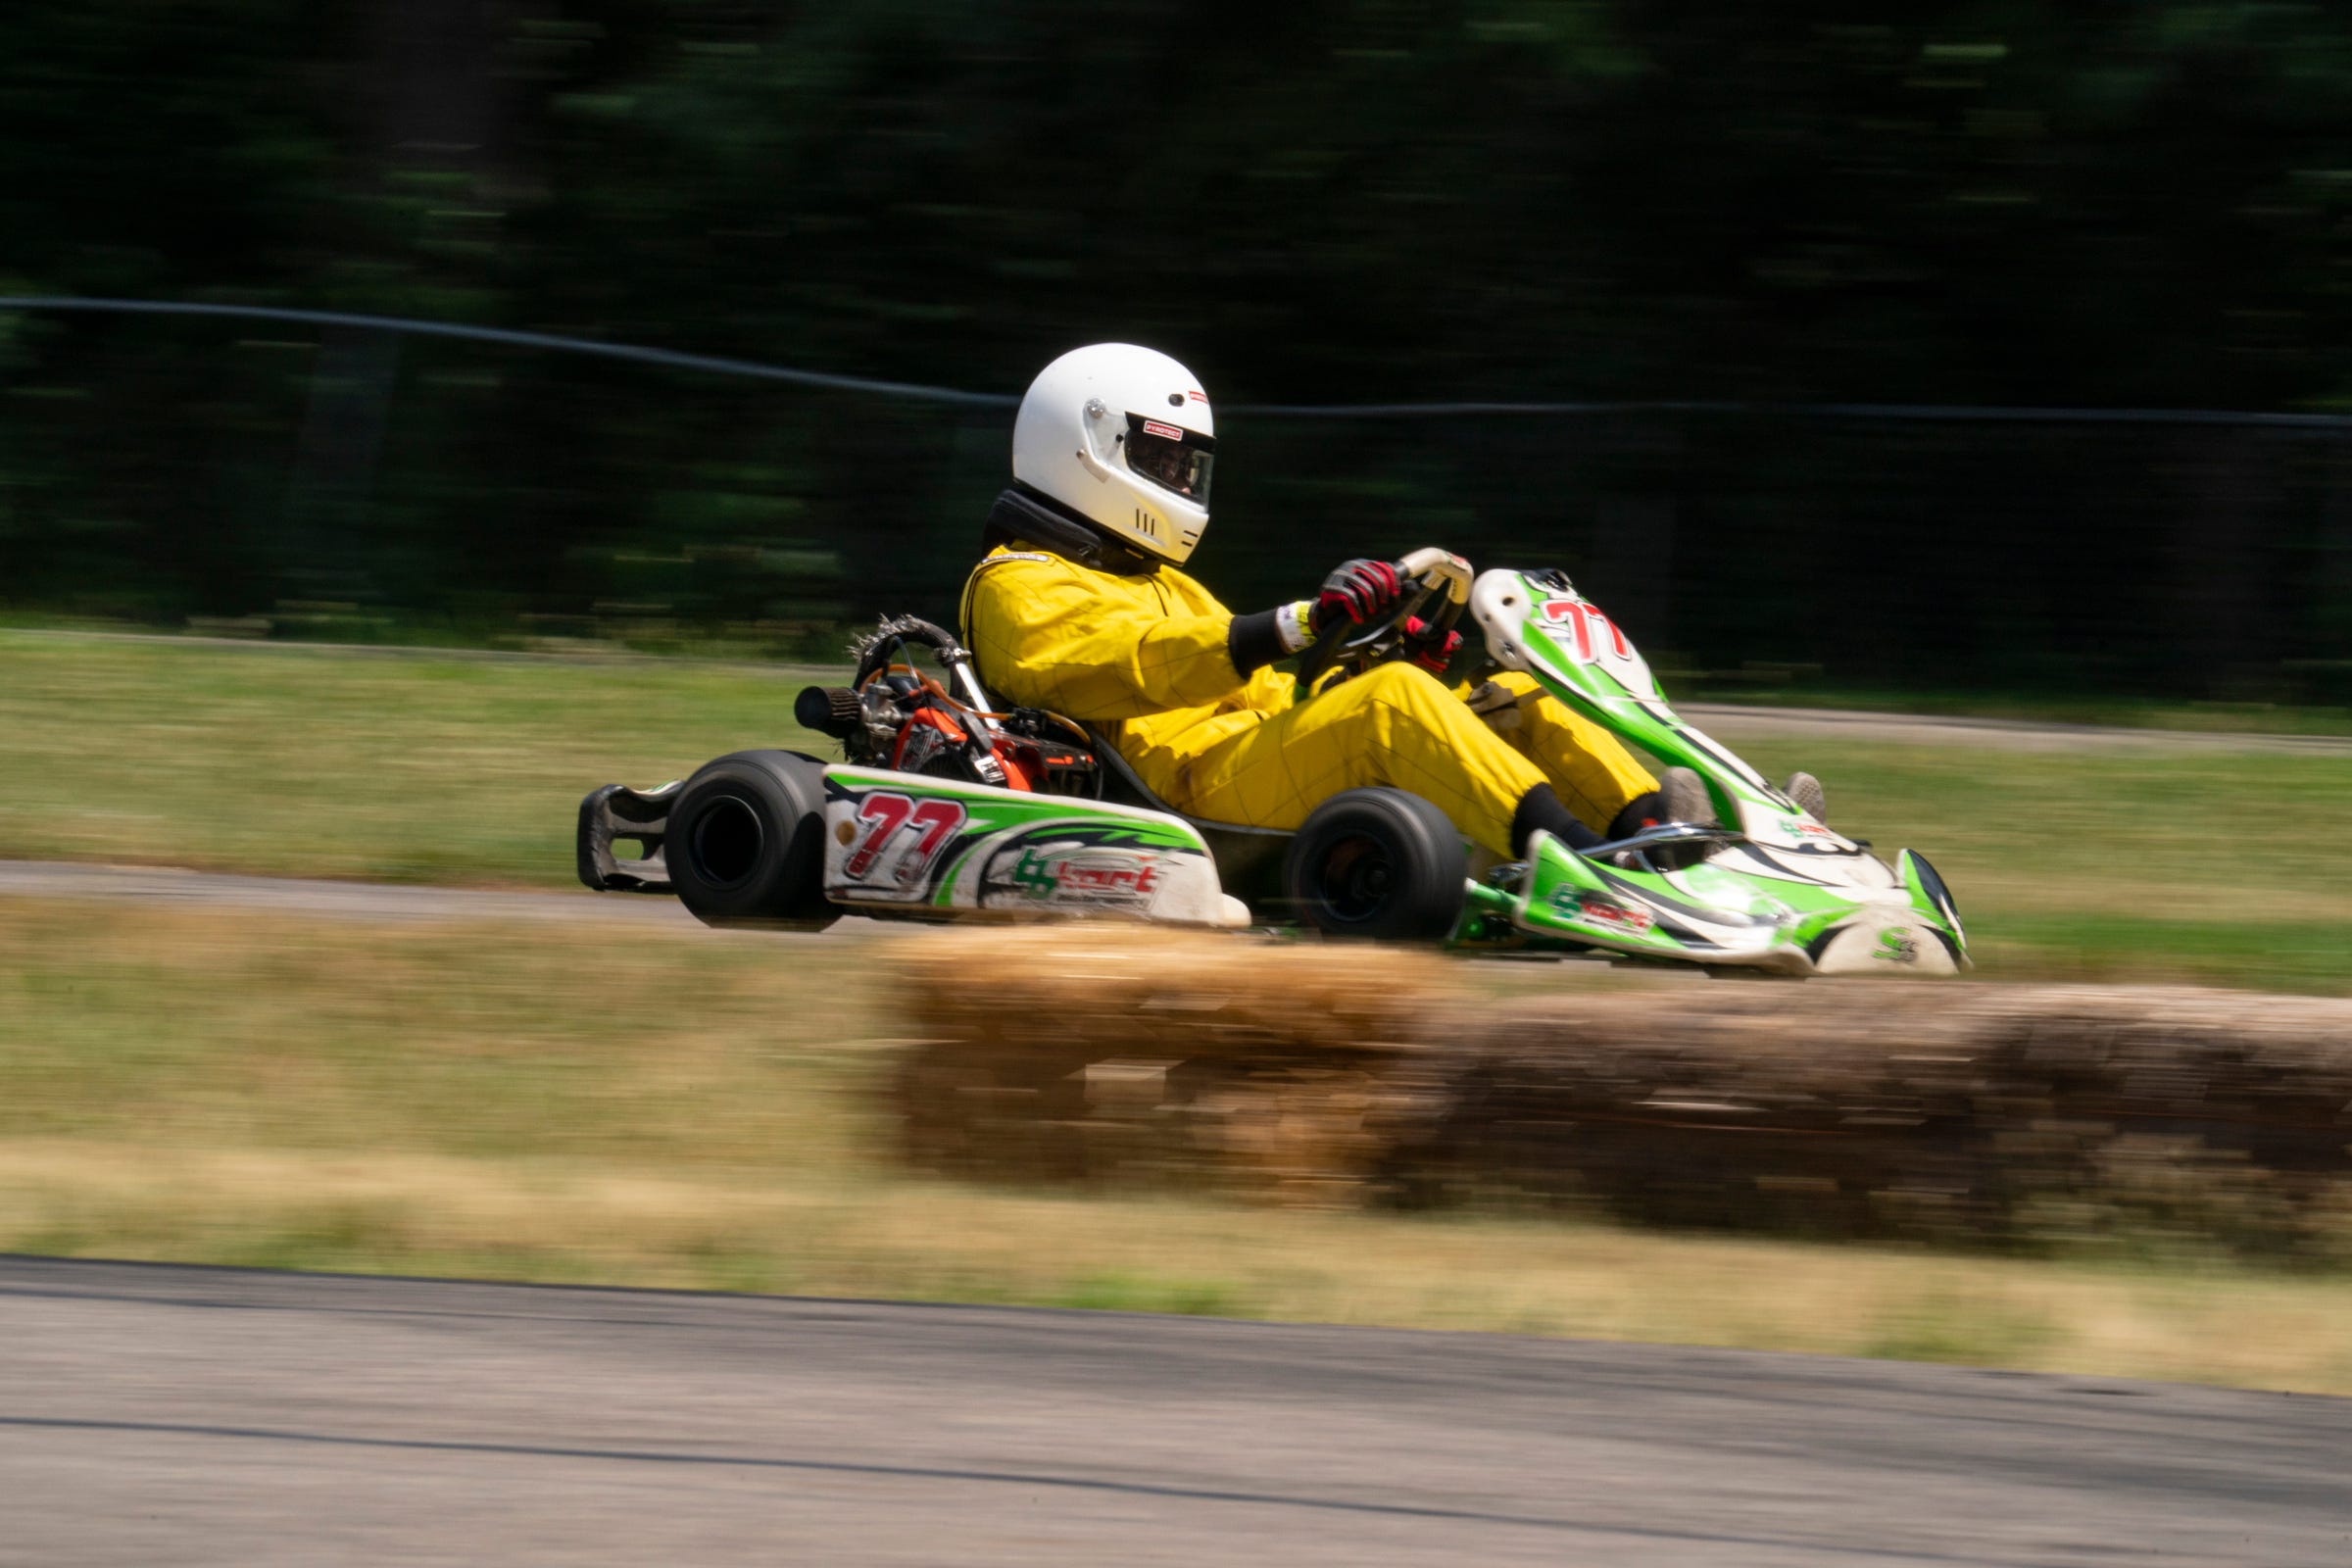 Detroit Student Race Team member Noah Christian, 17, of Detroit, does a practice run in one of the team's go-karts at the East Lansing Kart Track on Saturday, July 2, 2022.